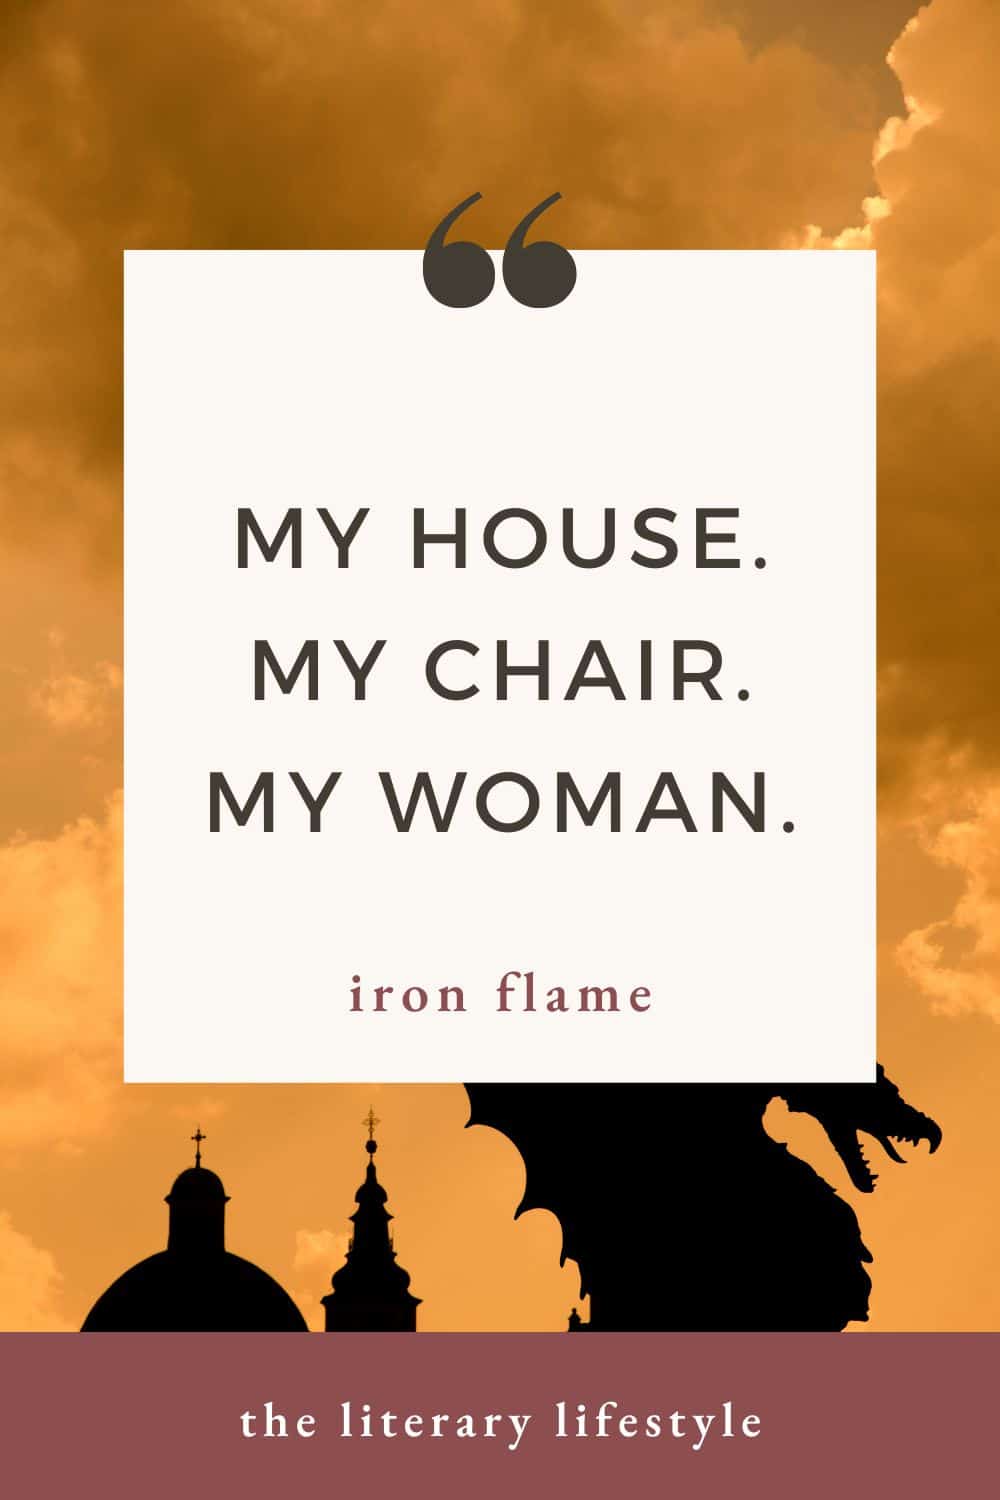 my house. my chair. my woman. -iron flame.